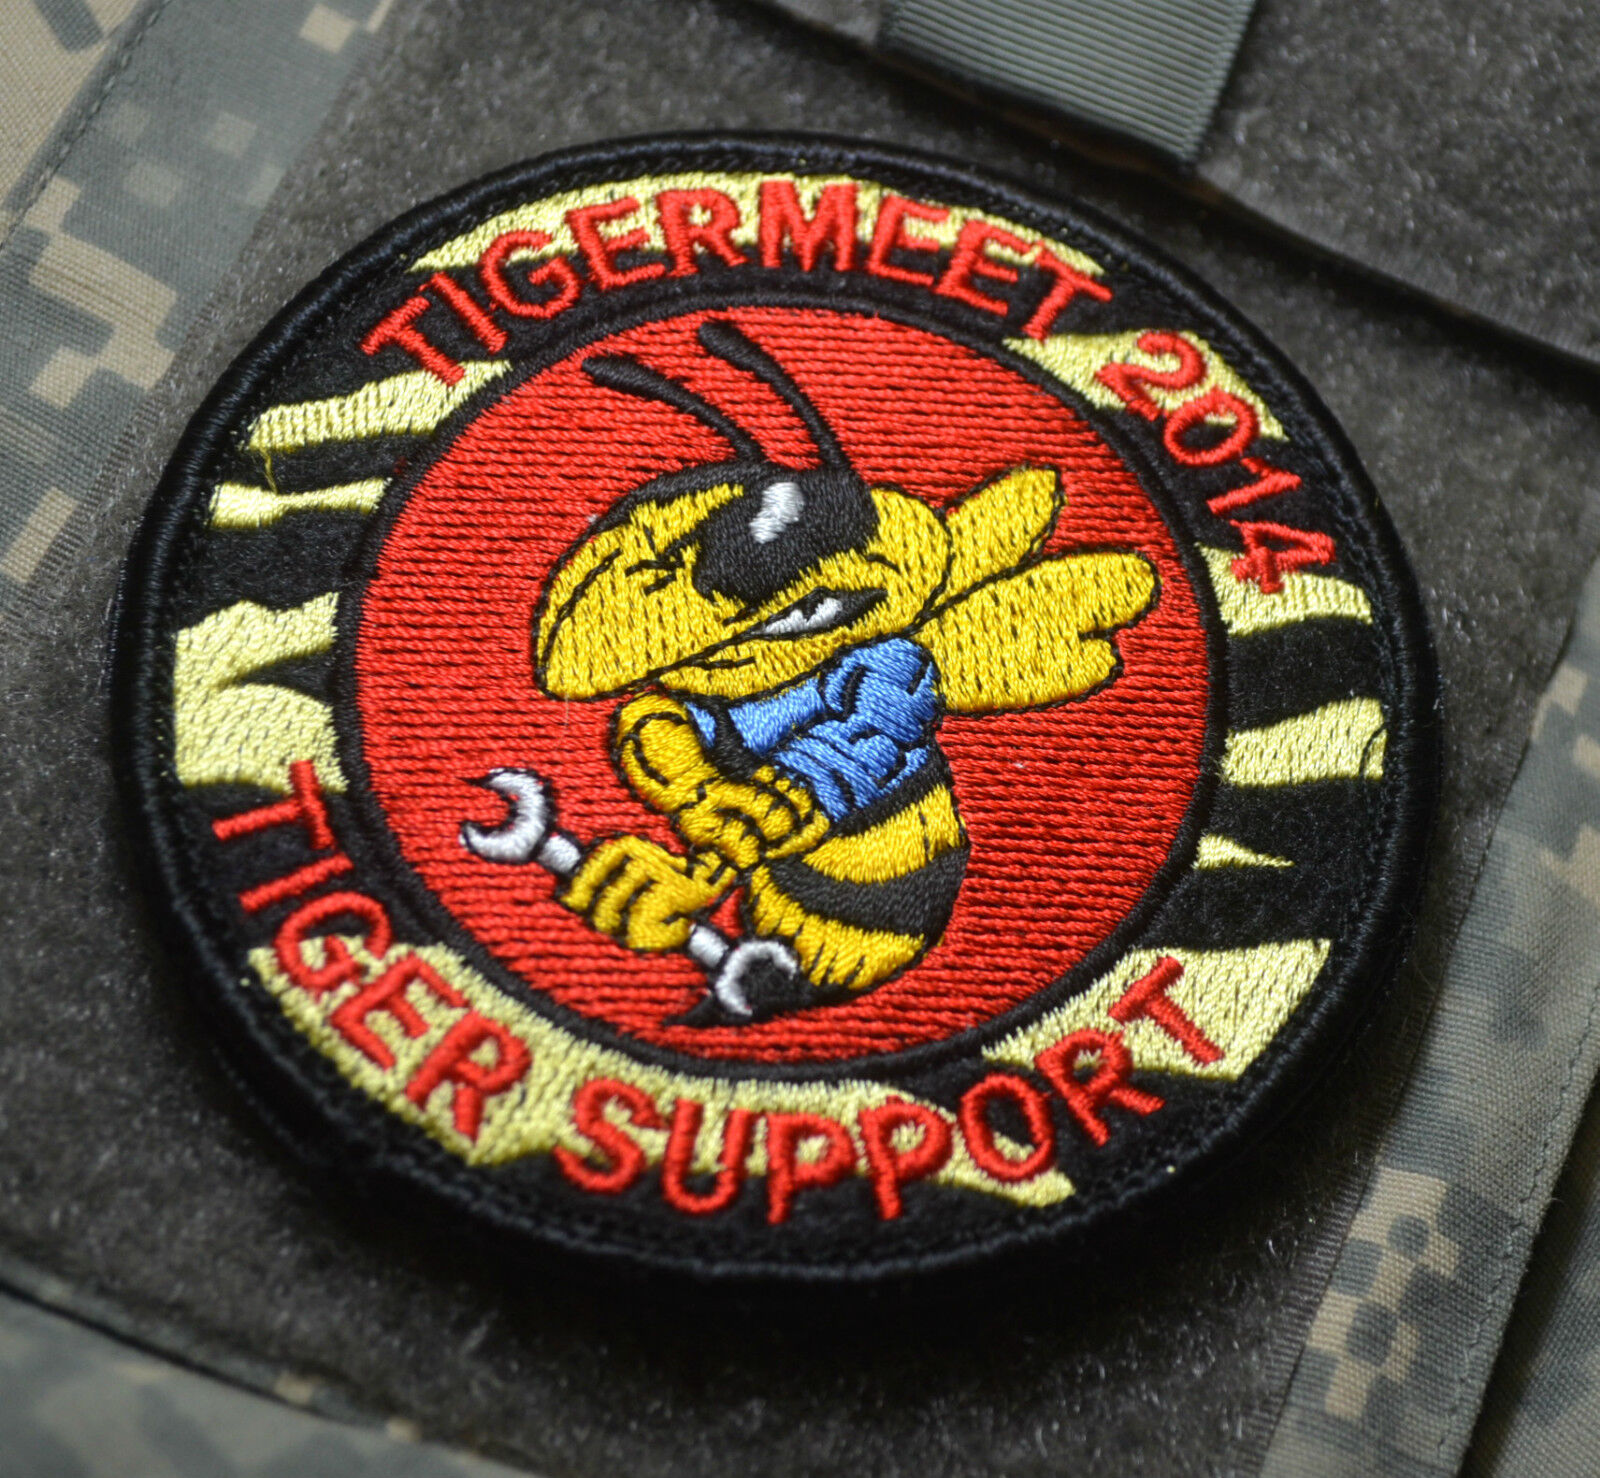 NTM 2014 NATO TIGER MEET INSIGNIA COLLECTIONS INSIGNIA: TIGER MEET TIGER SUPPORT